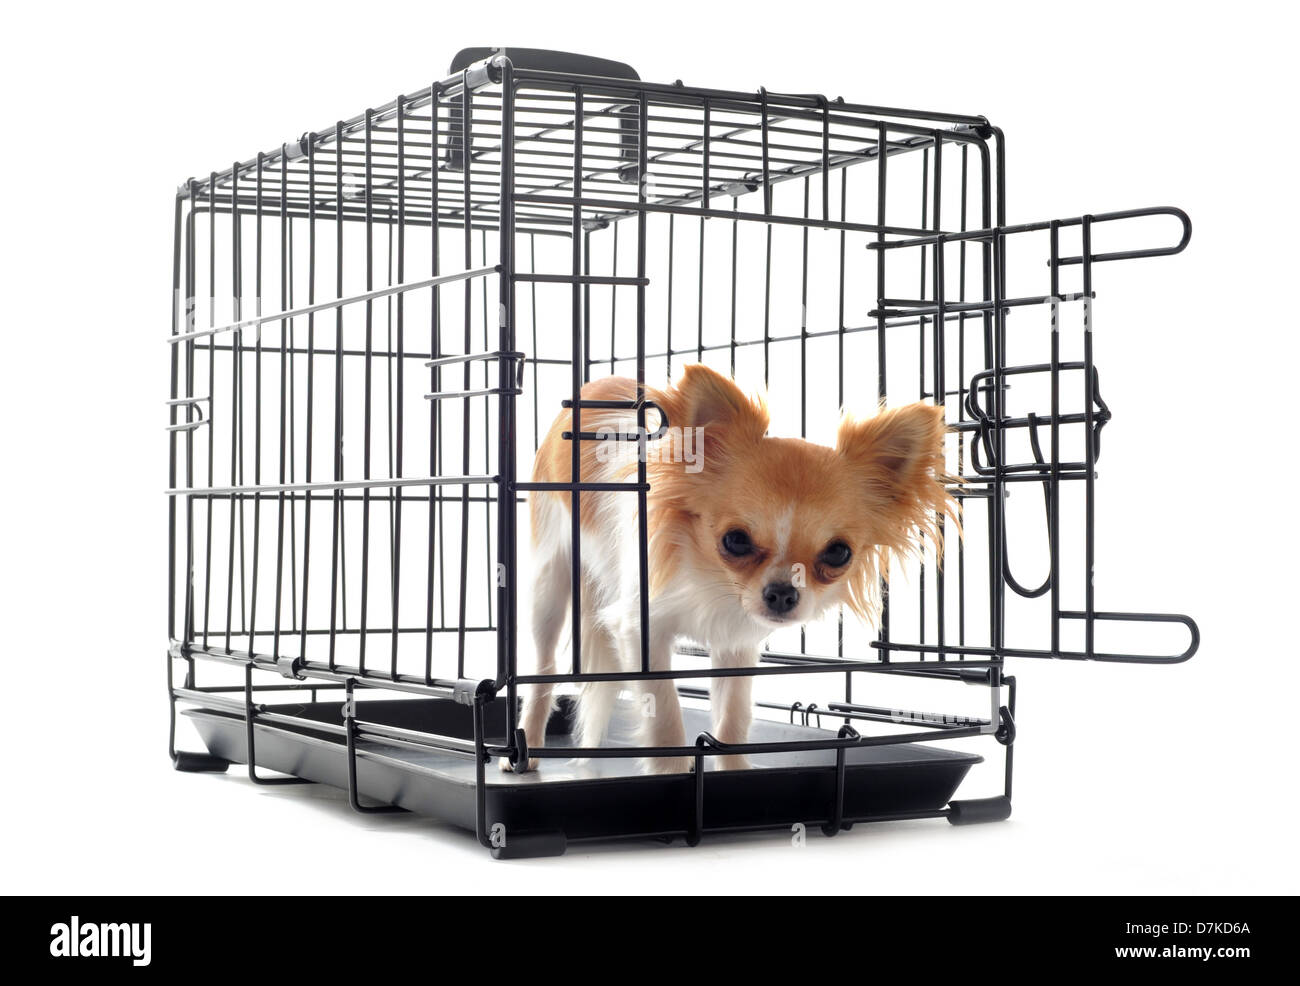 chihuahua closed inside pet carrier isolated on white background Stock Photo